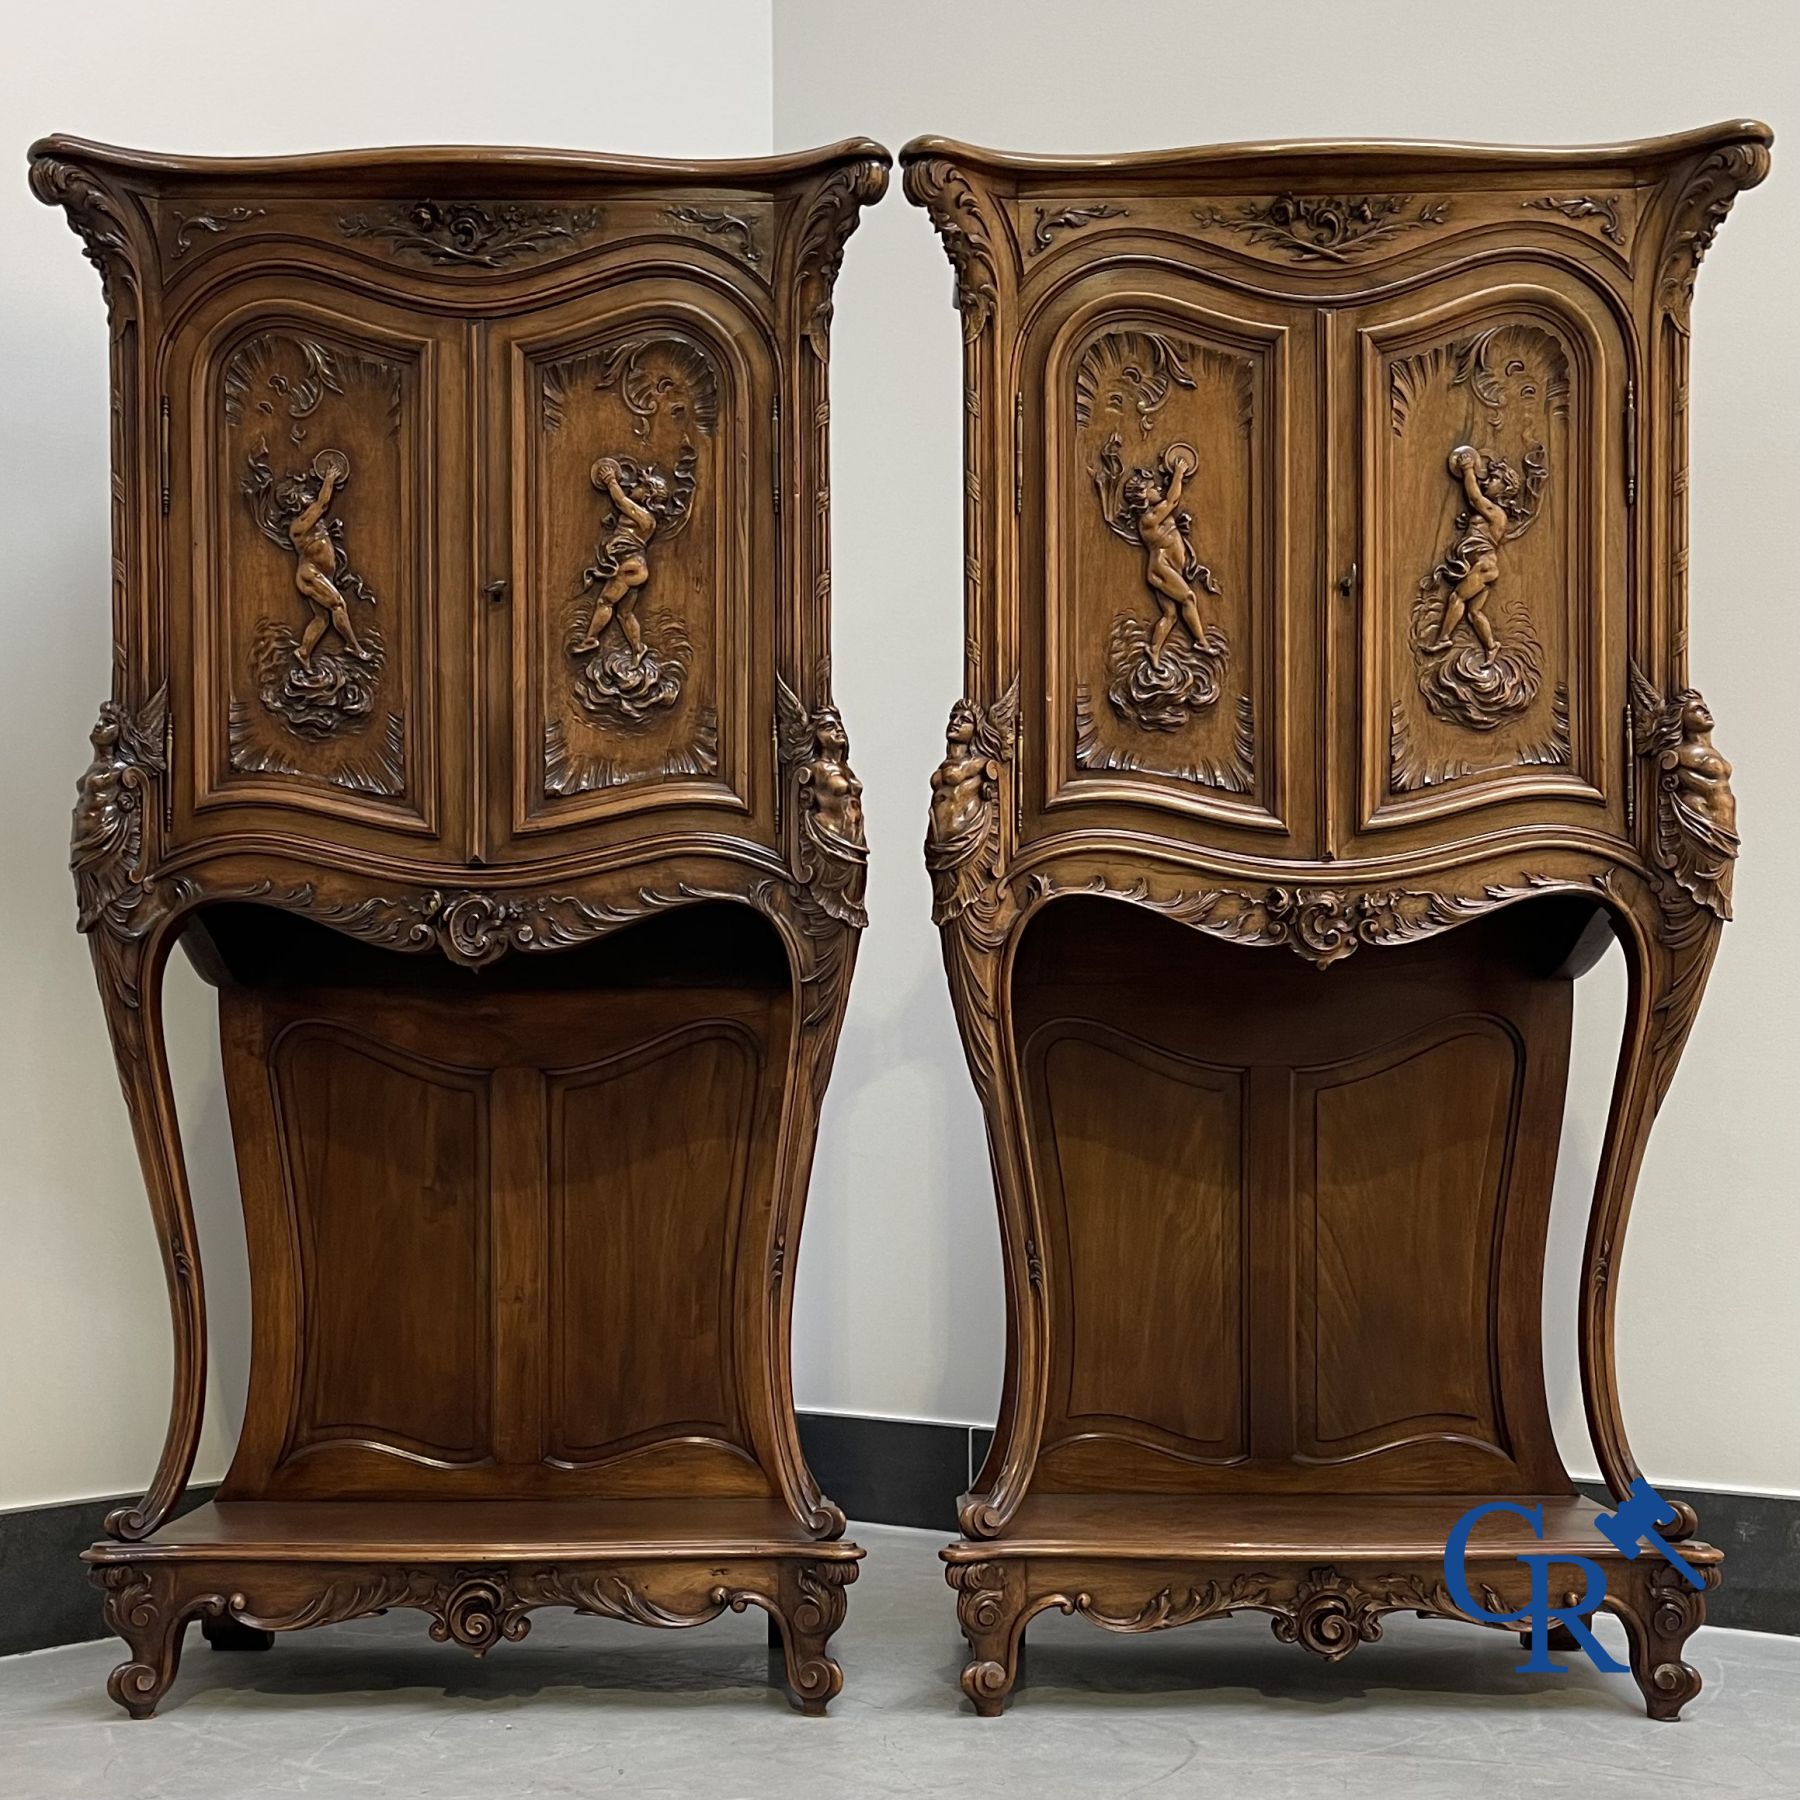 Furniture: A pair of finely carved furniture. LXV style.